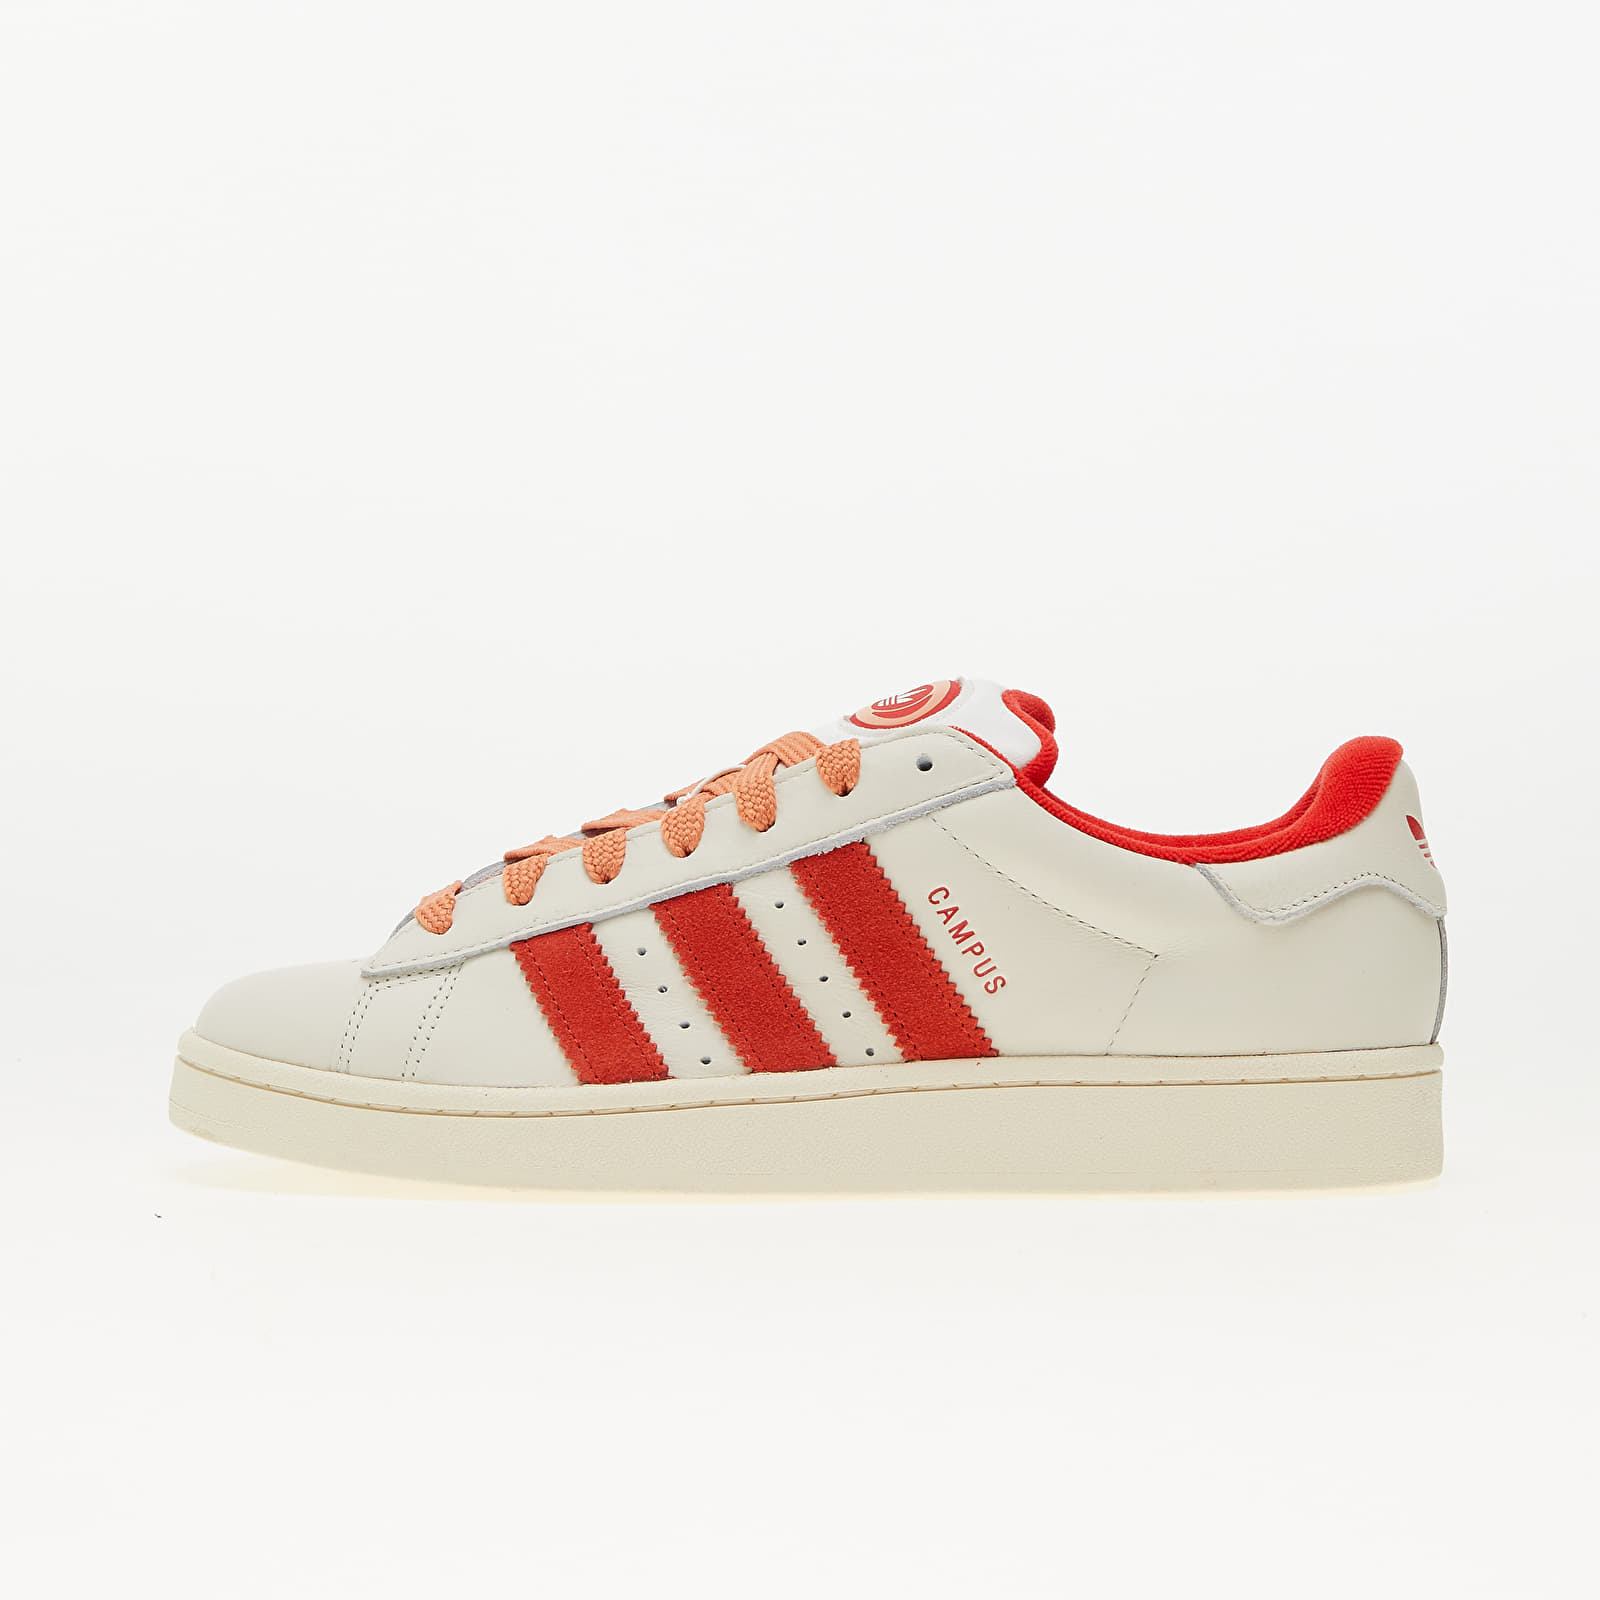 Men's sneakers and shoes adidas Campus 00s Off White/ Red/ Preloved Red